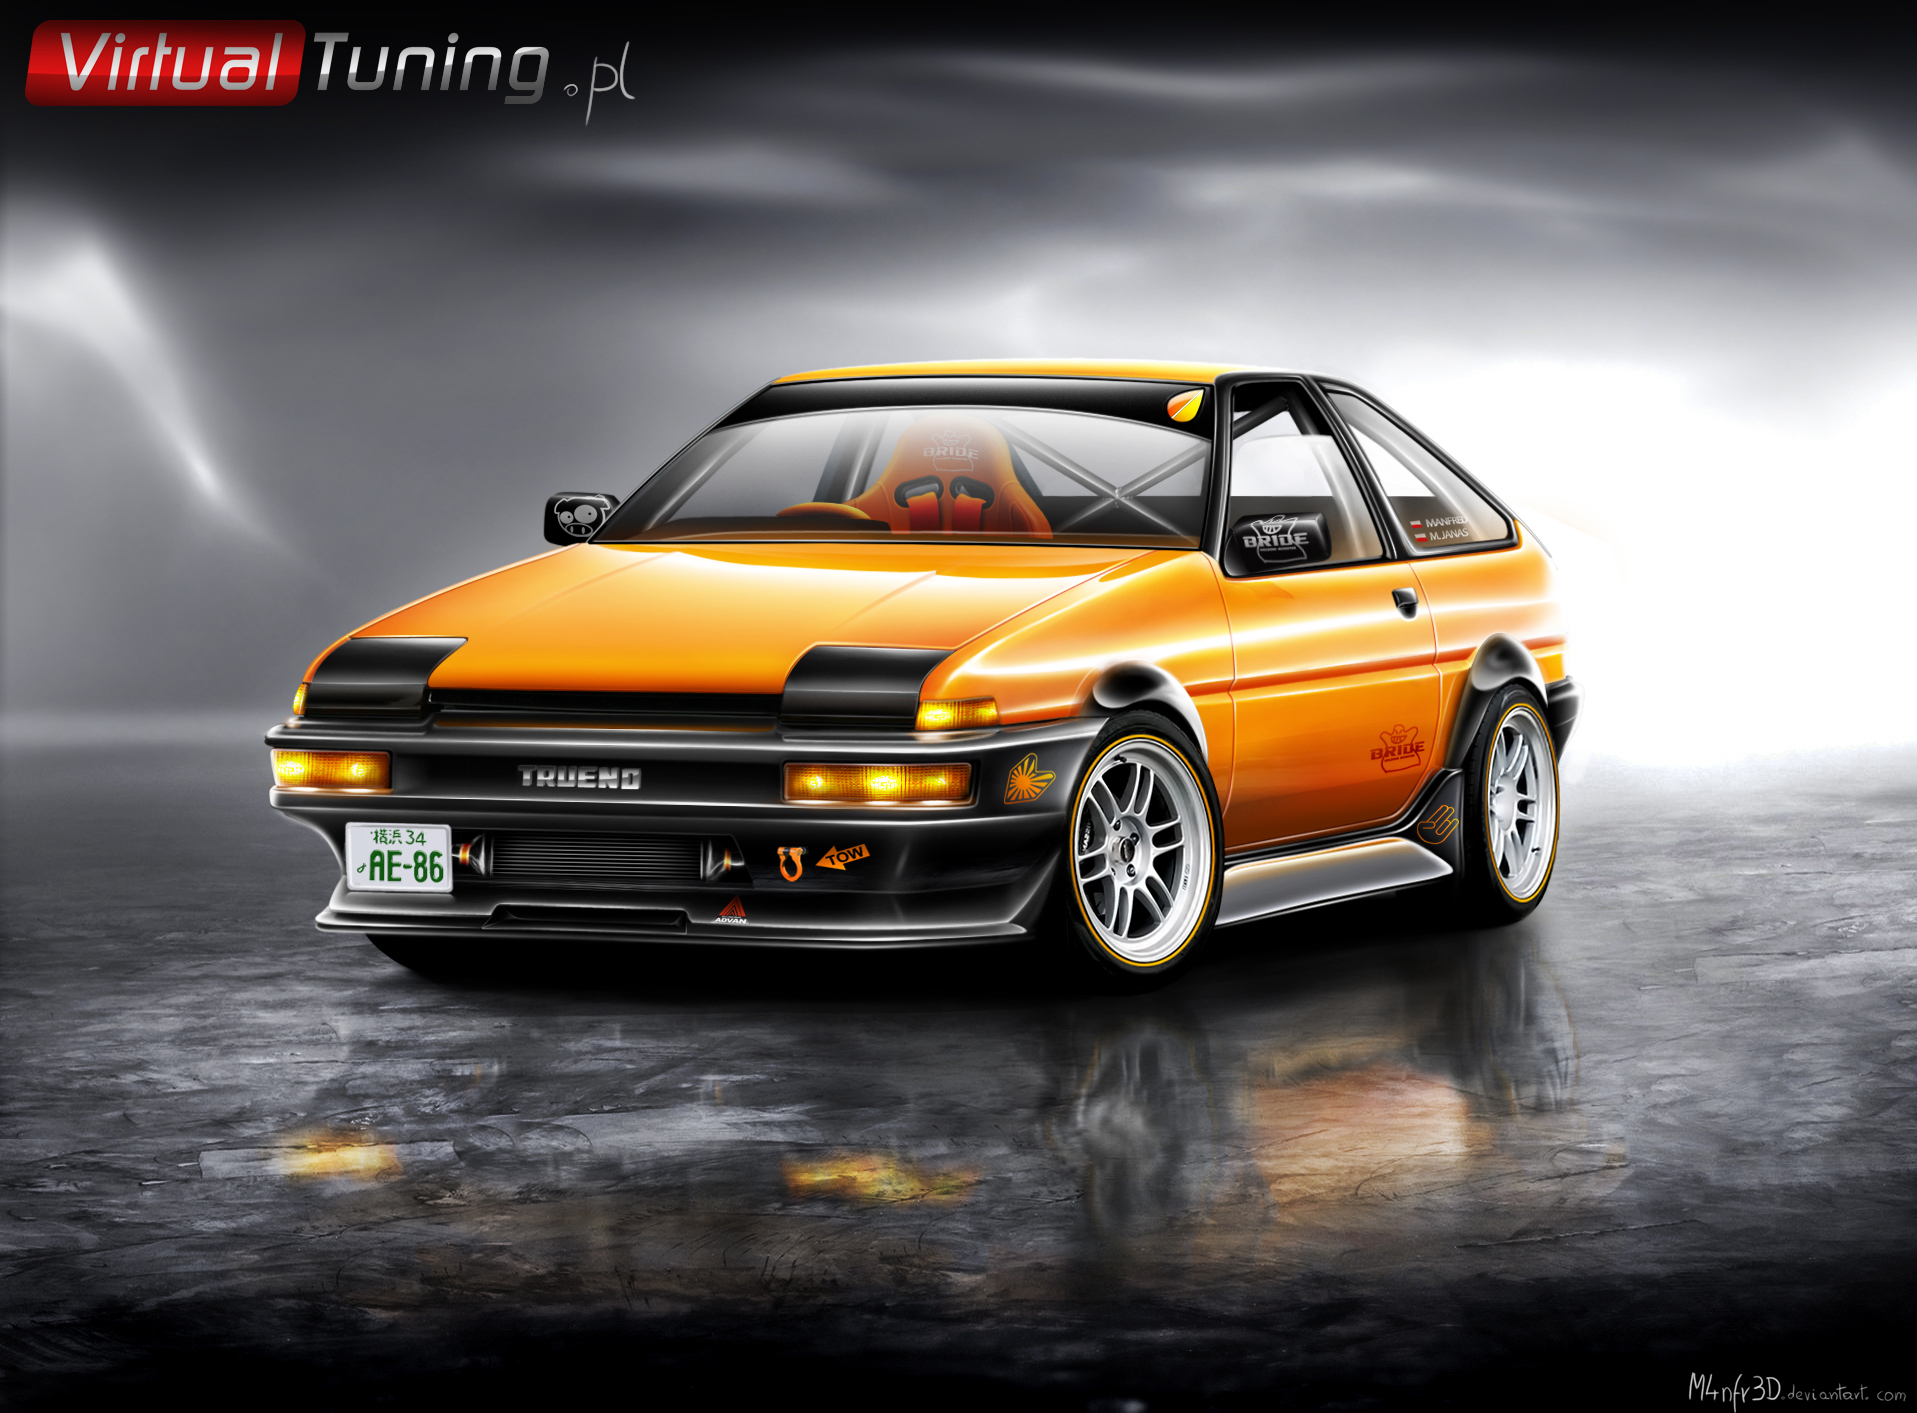 Toyota Corolla AE86 by ~M4nfr3D on deviantART